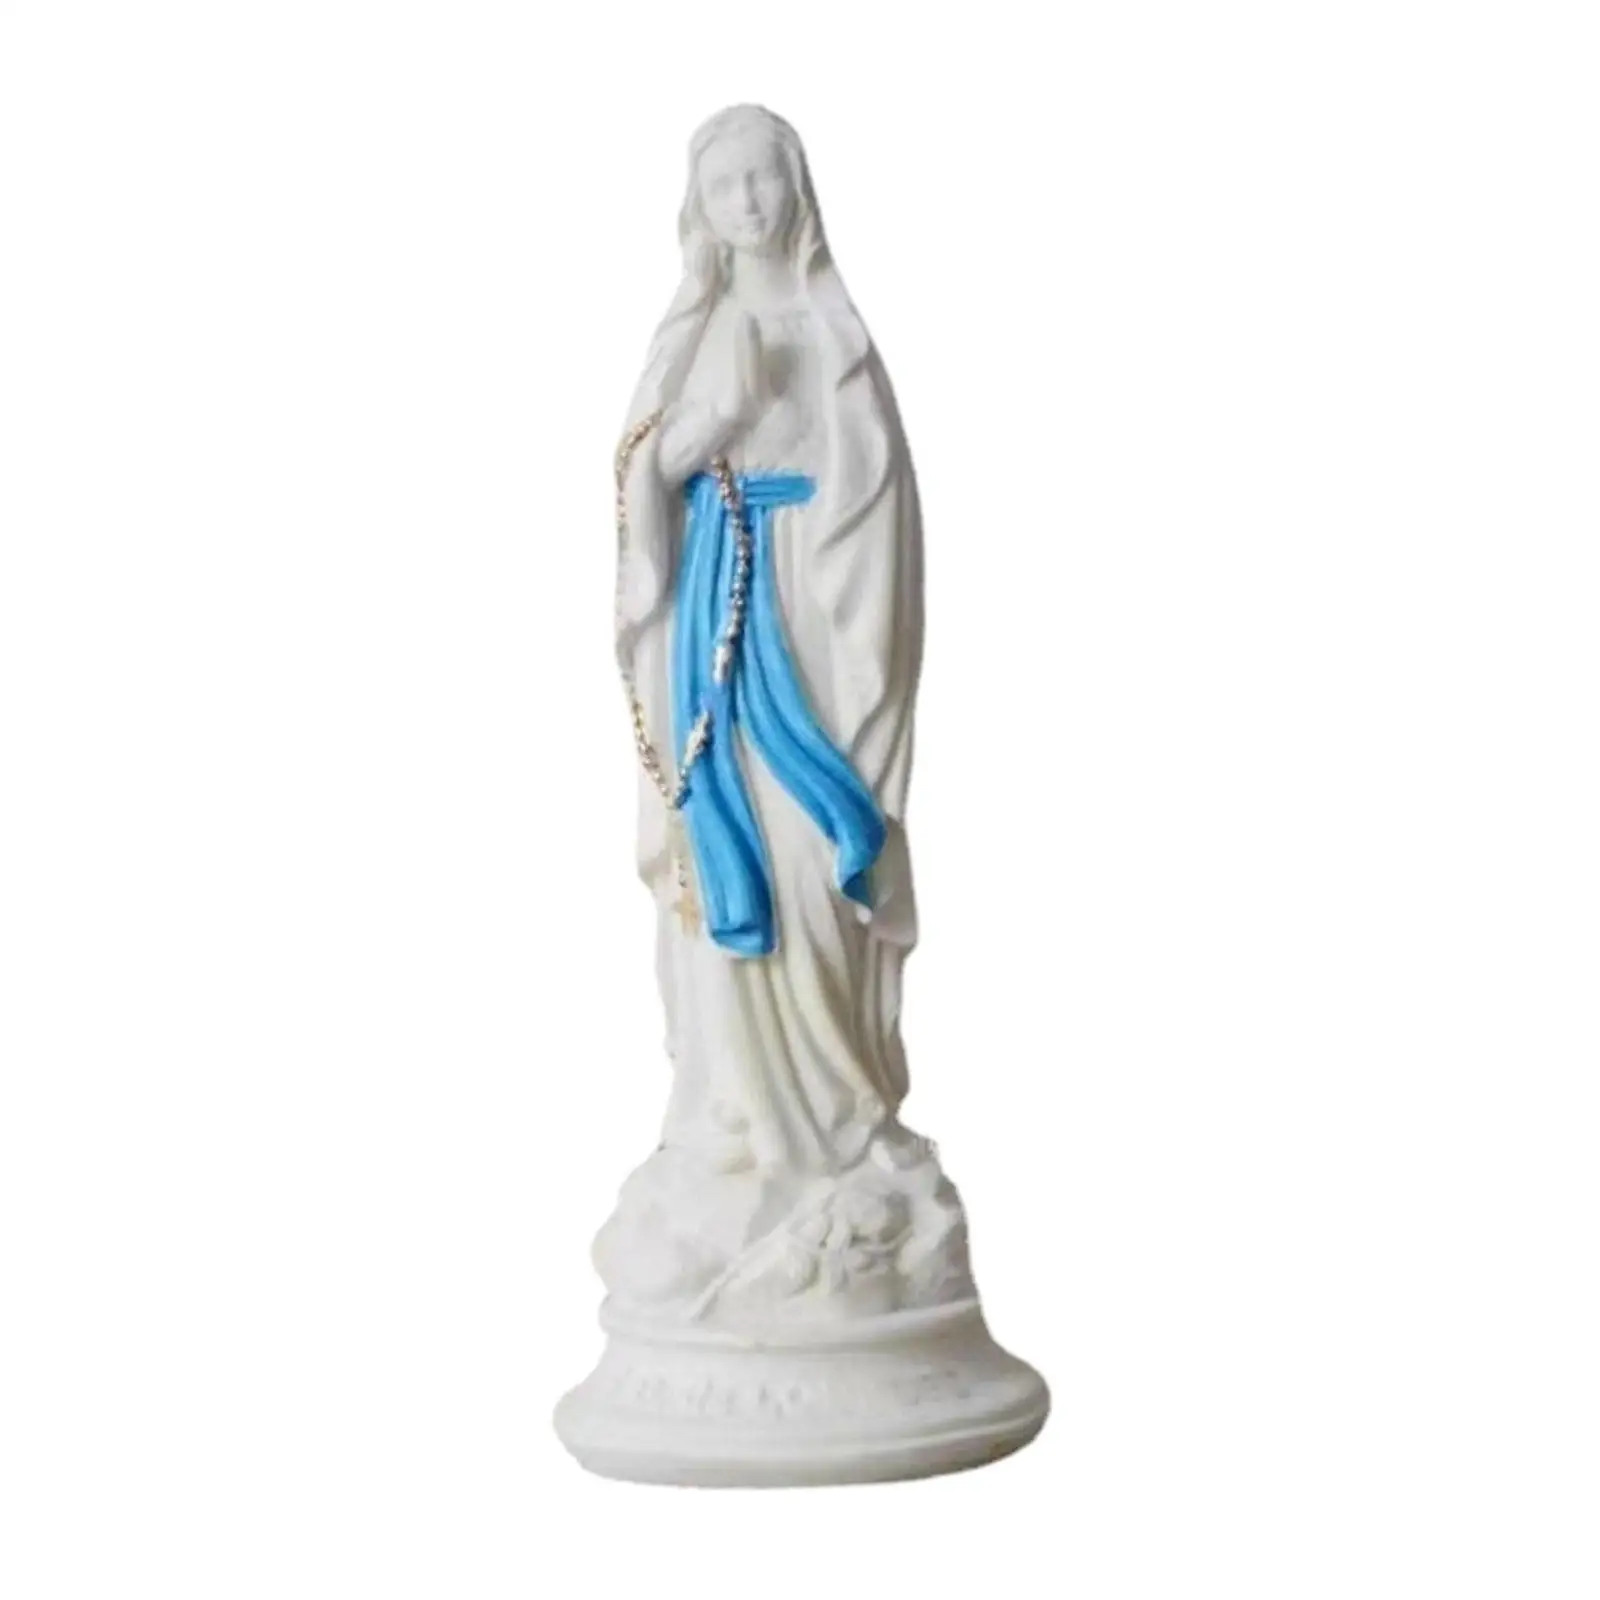 Holy Mother Figurine Virgin Mother Mary Statue 5.5